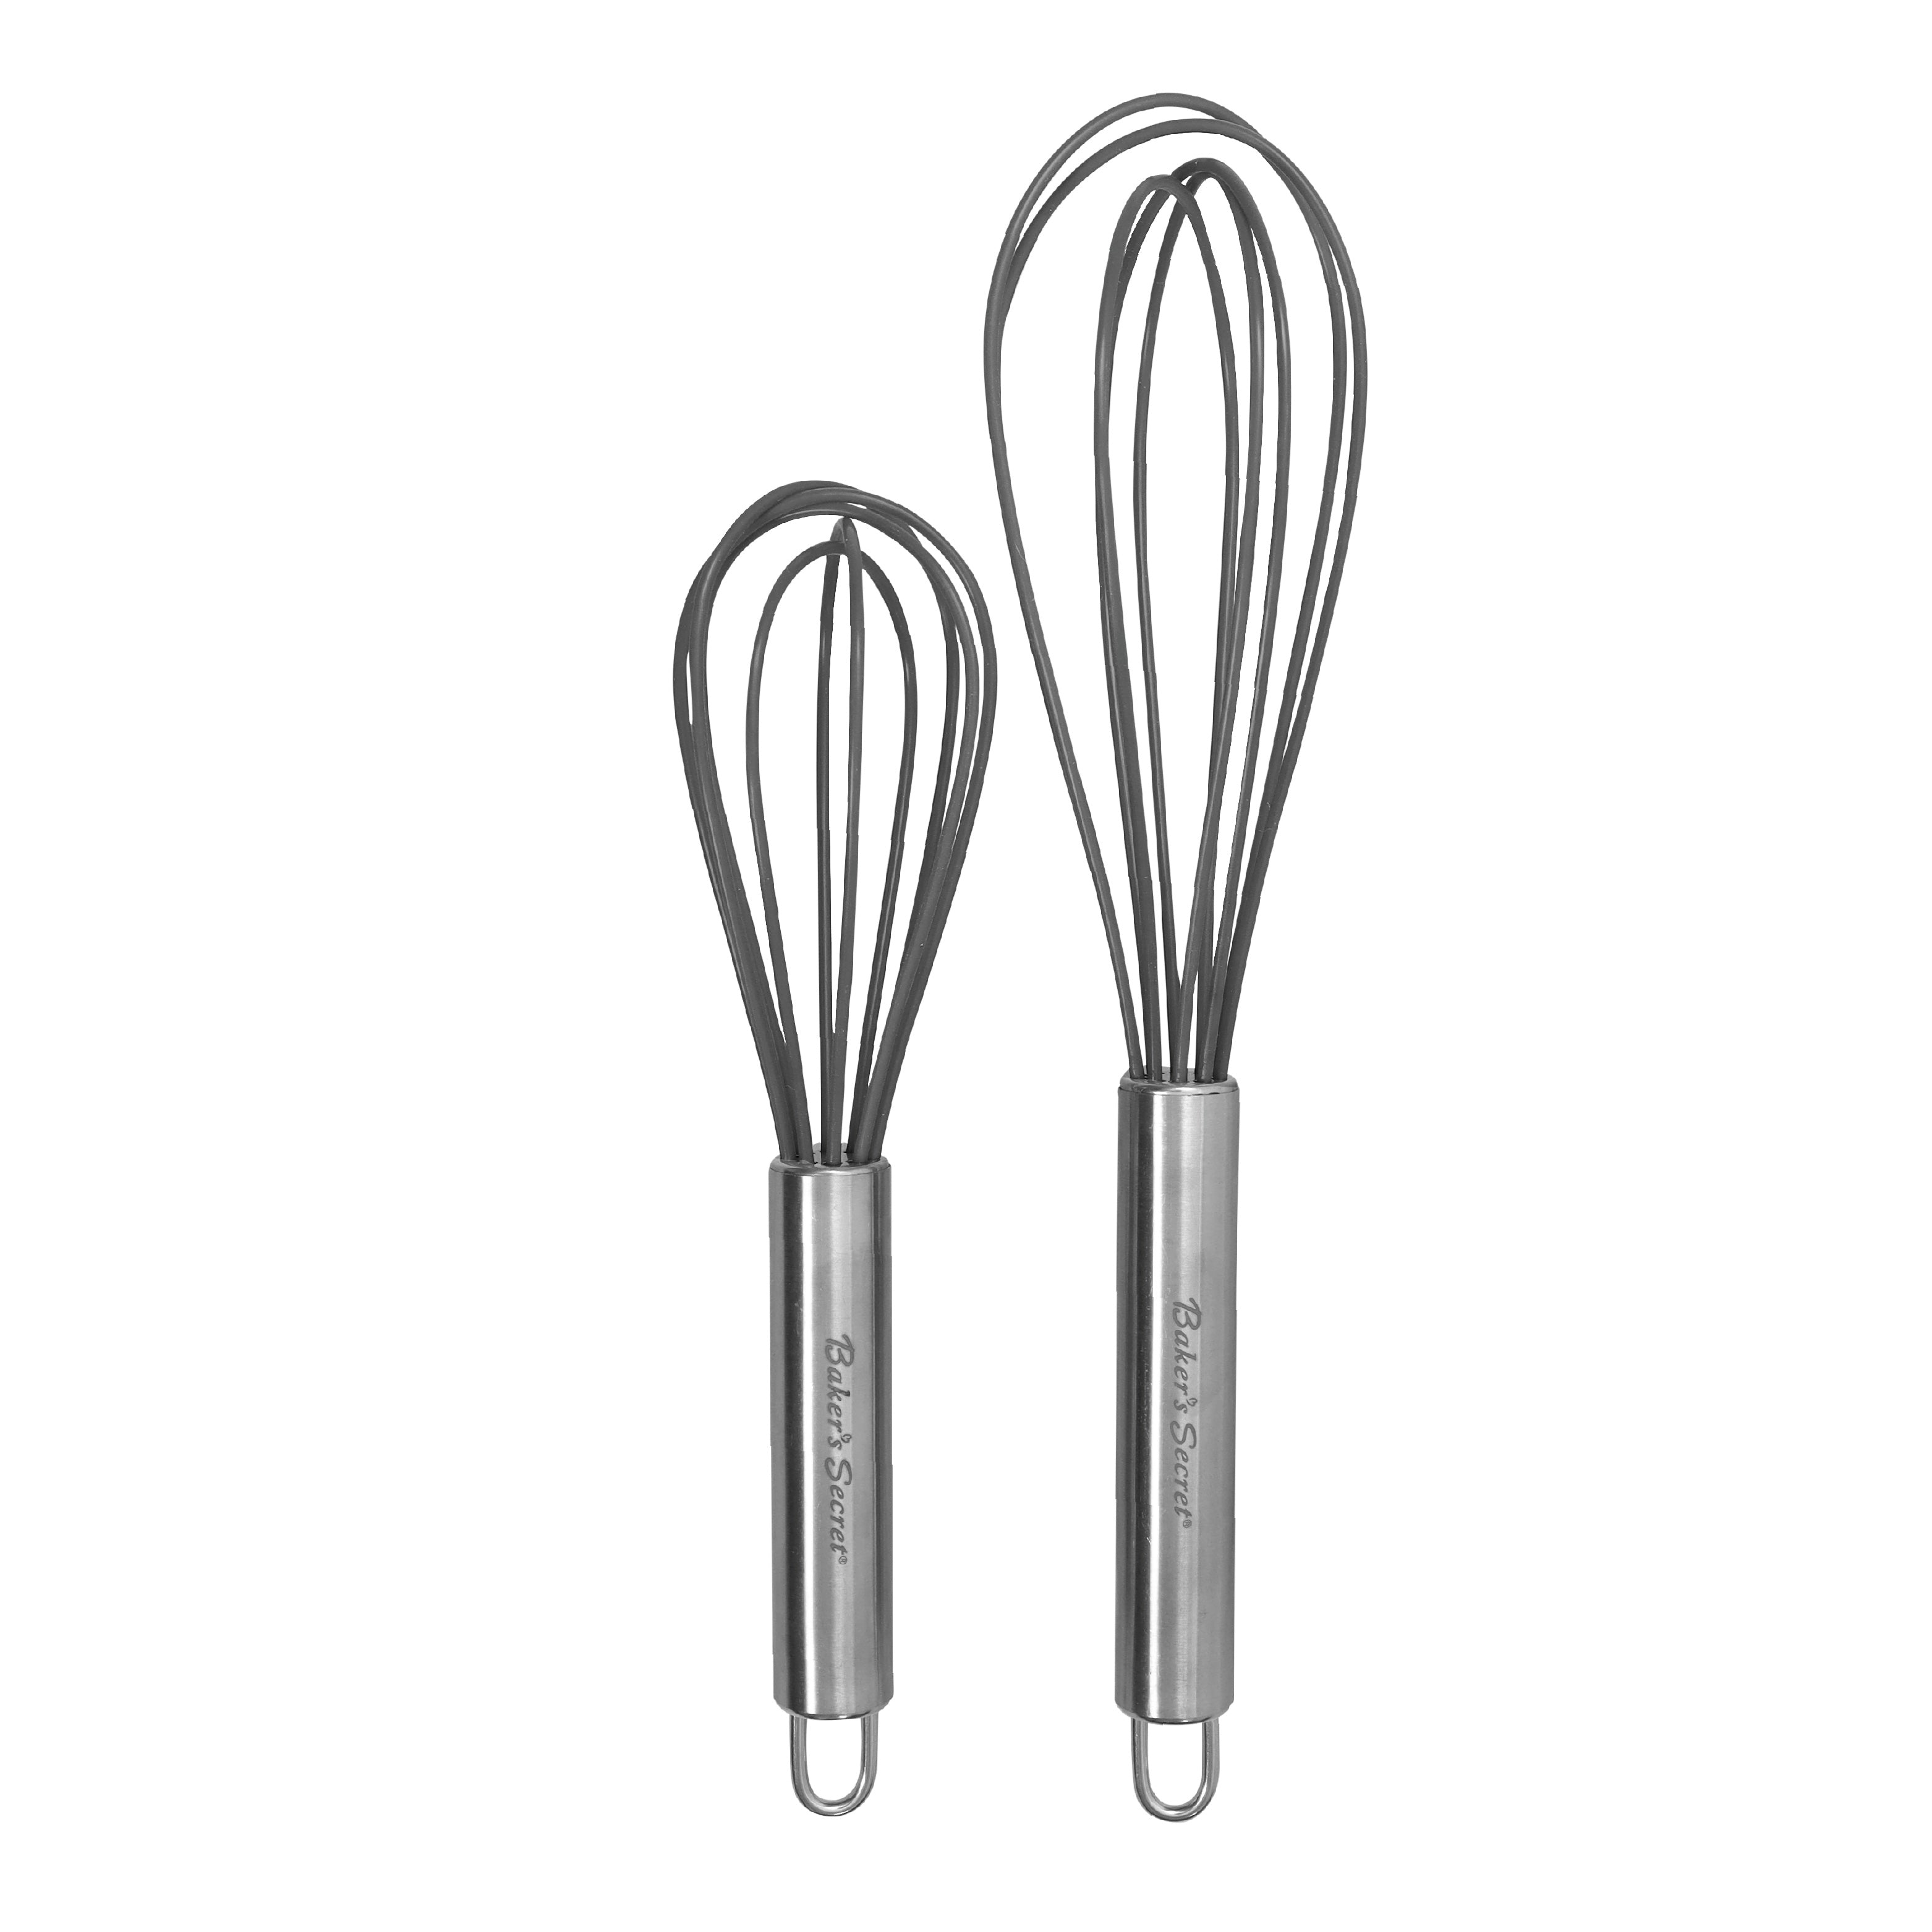 Kitchen Balloon Whisk Set With Silicone Scraper Include 2pc Stainless Steel  Whisk 10 +13 And Egg Separator For Blending - Buy Kitchen Balloon Whisk  Set With Silicone Scraper Include 2pc Stainless Steel